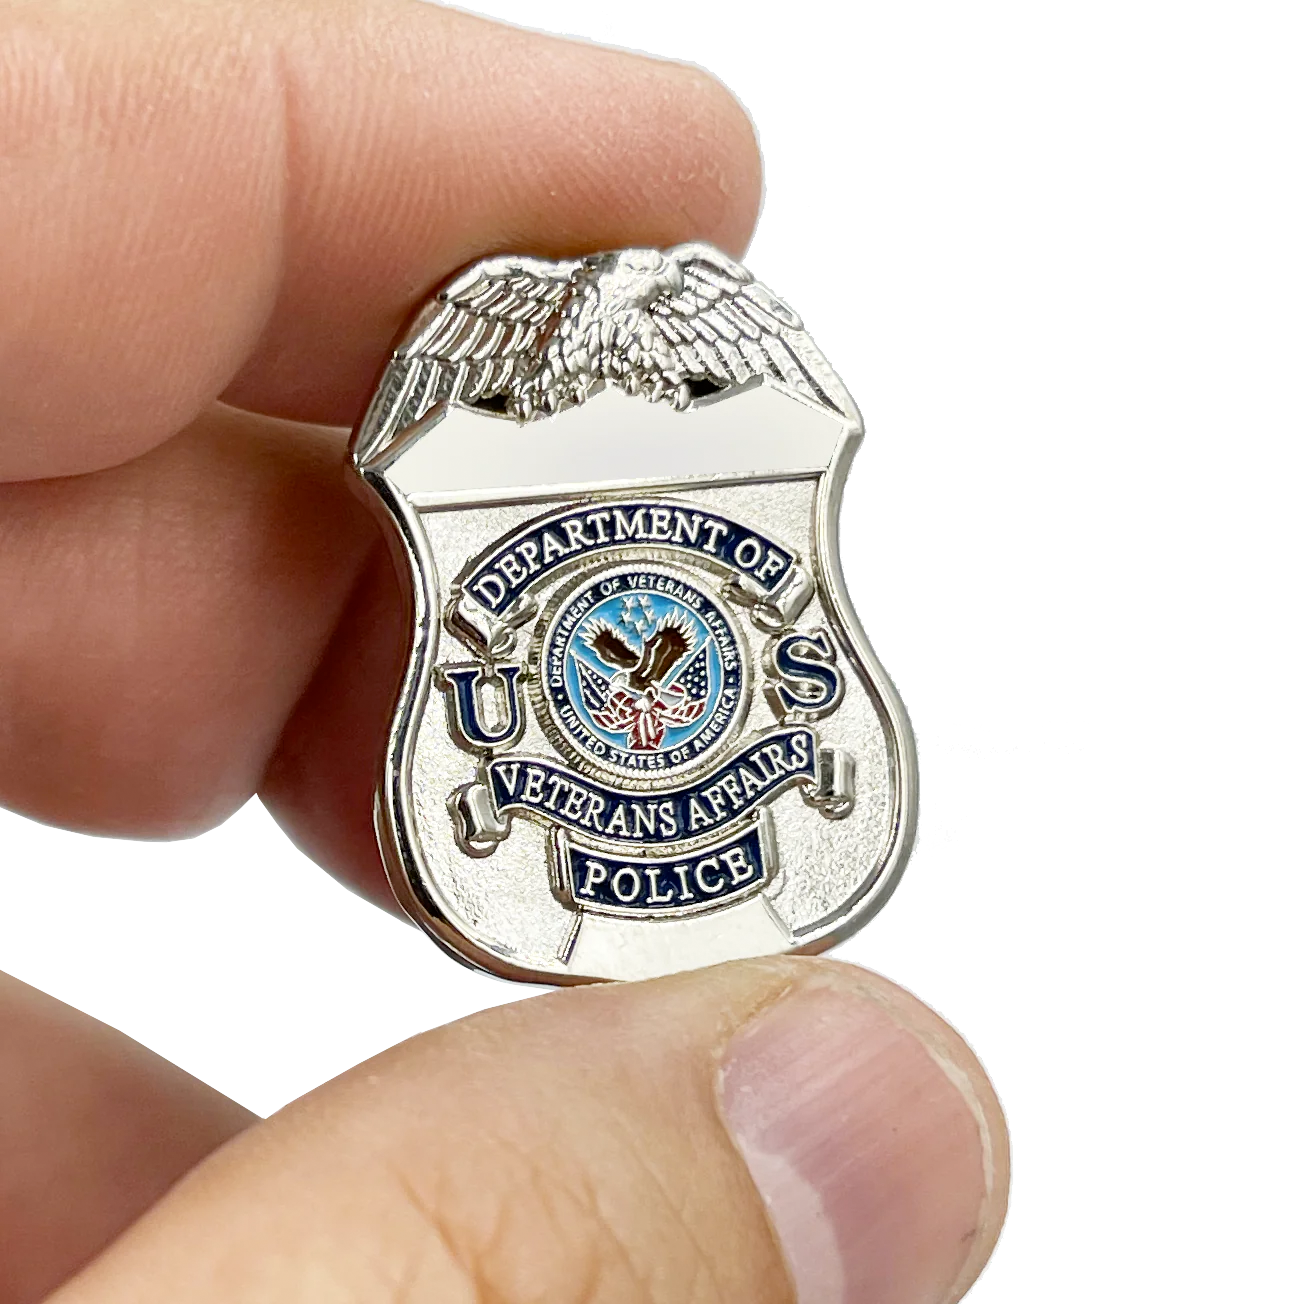 BL6-015 VA Veterans Affairs Administration lapel pin for Police Officer Detective